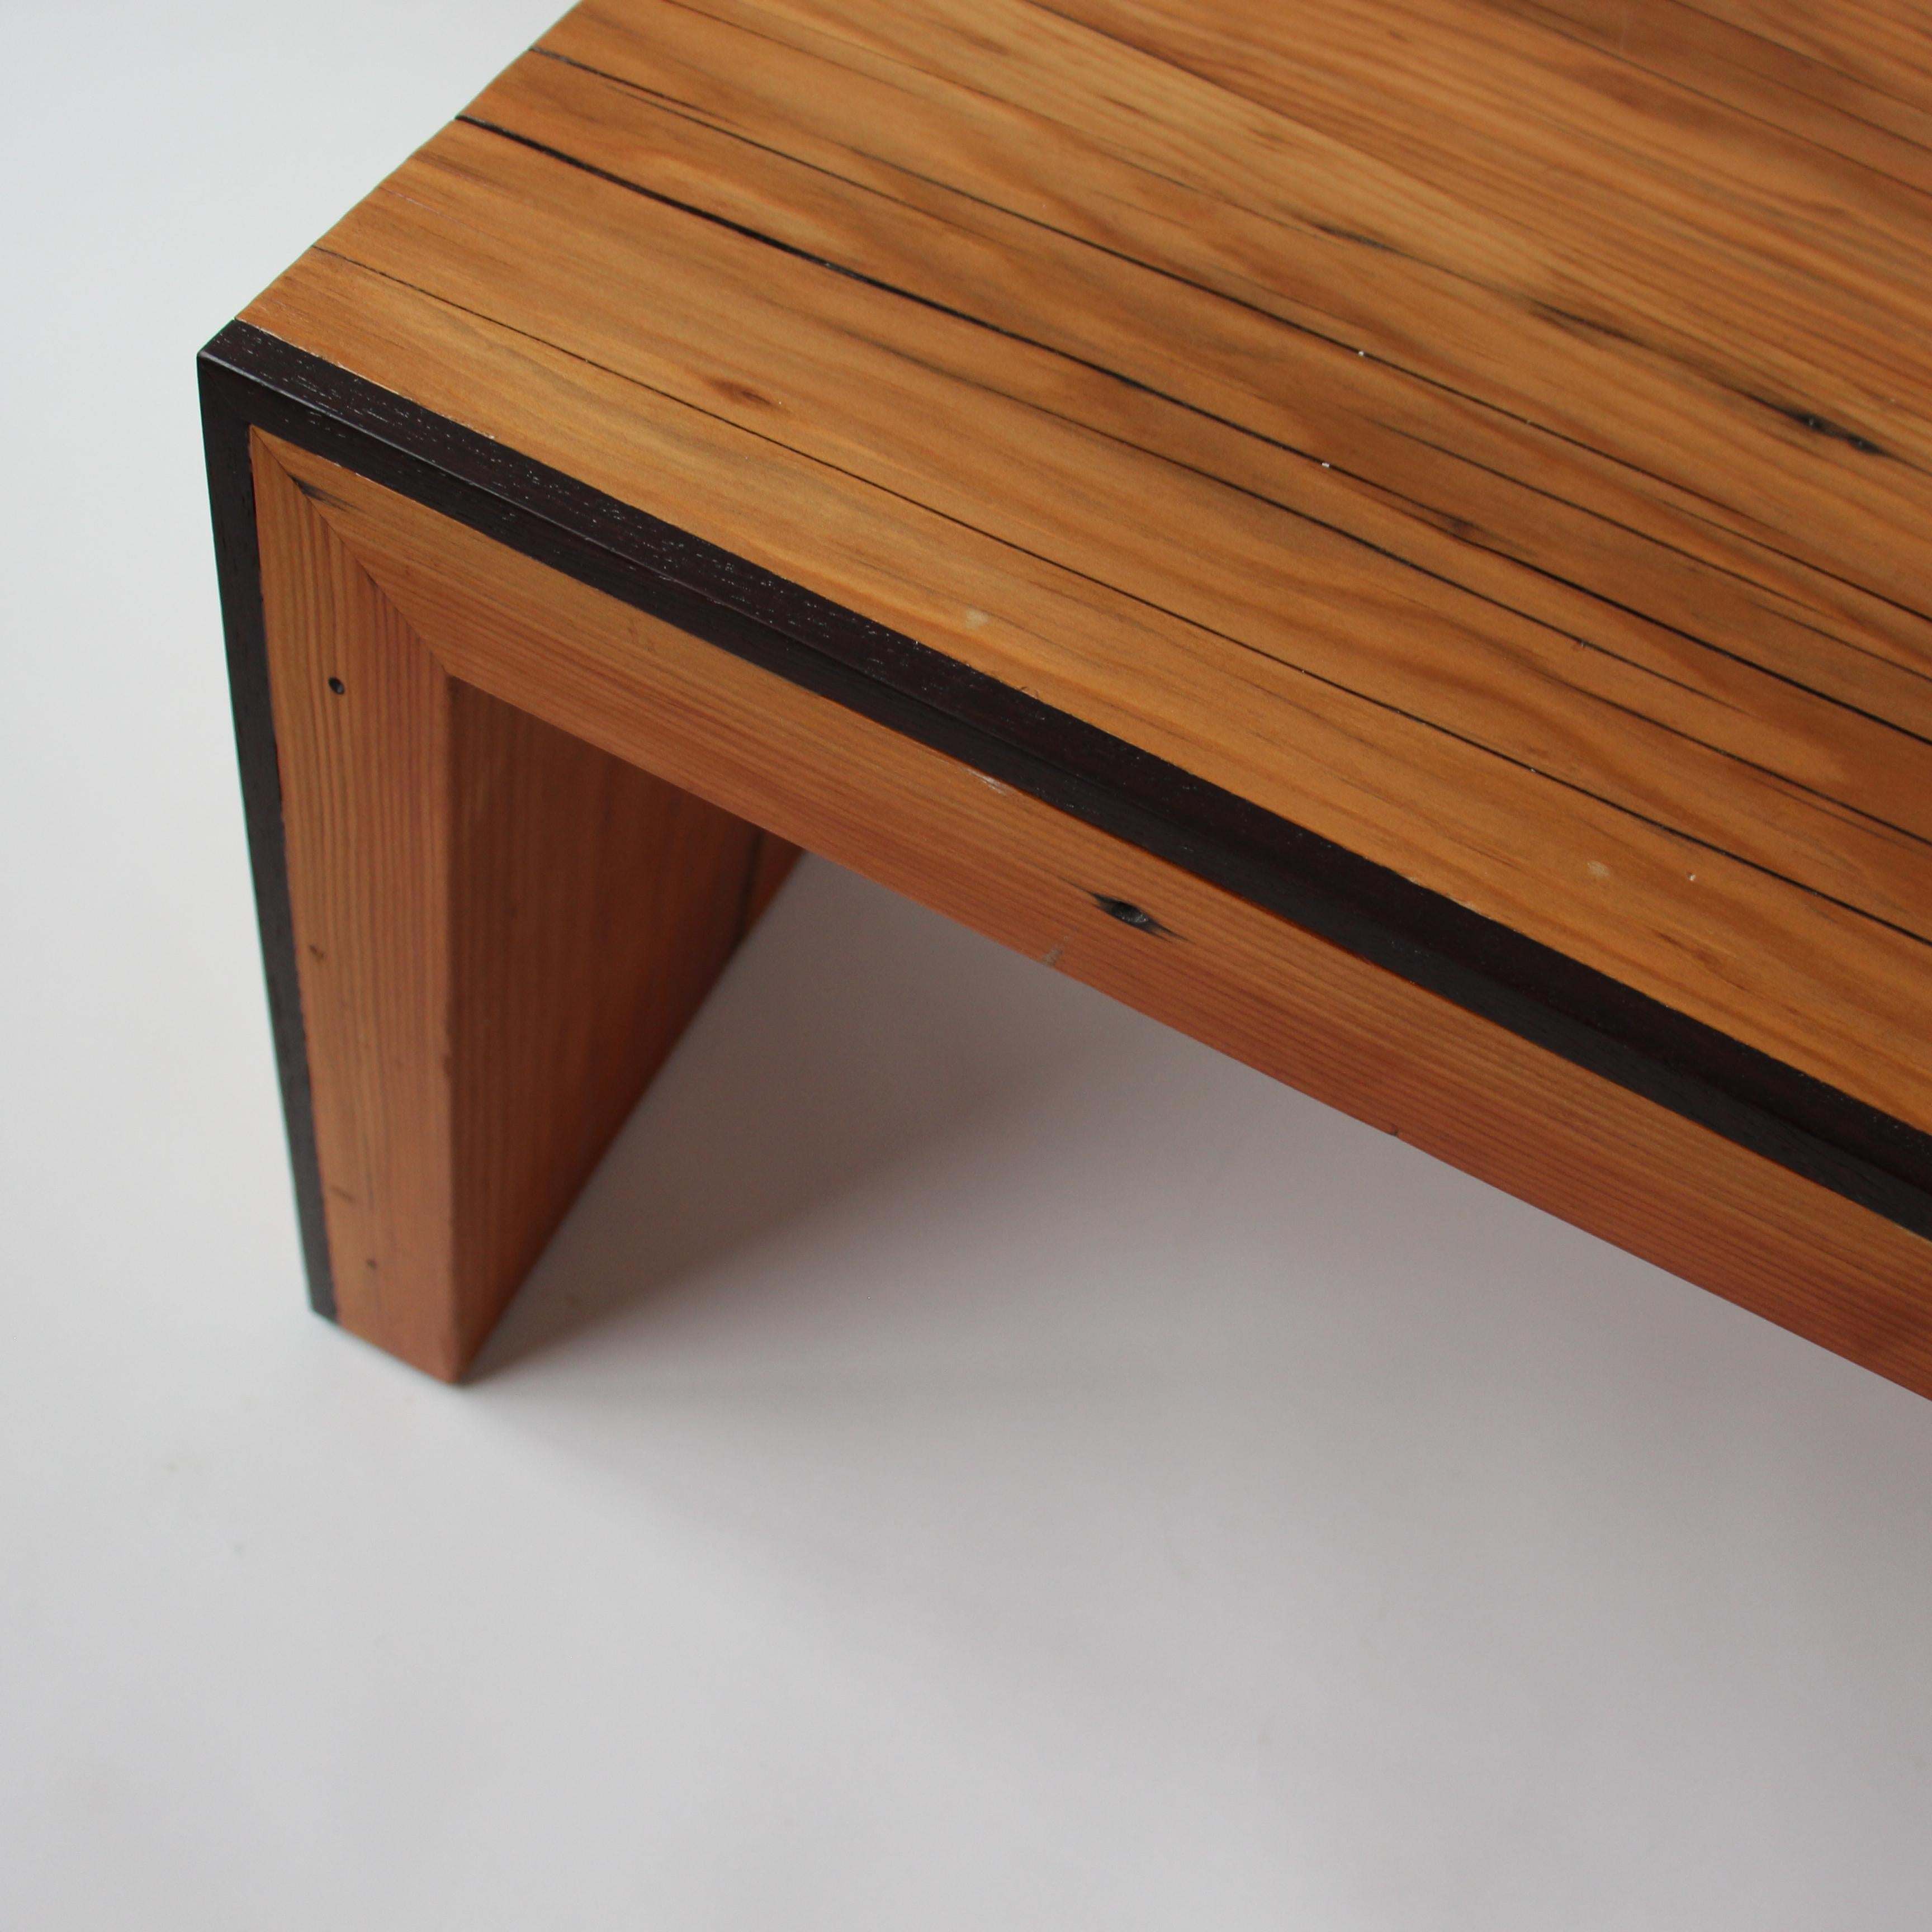 Wenge Monster Island Coffee Table Bench in Reclaimed Fir, Edged in Wengue - in stock